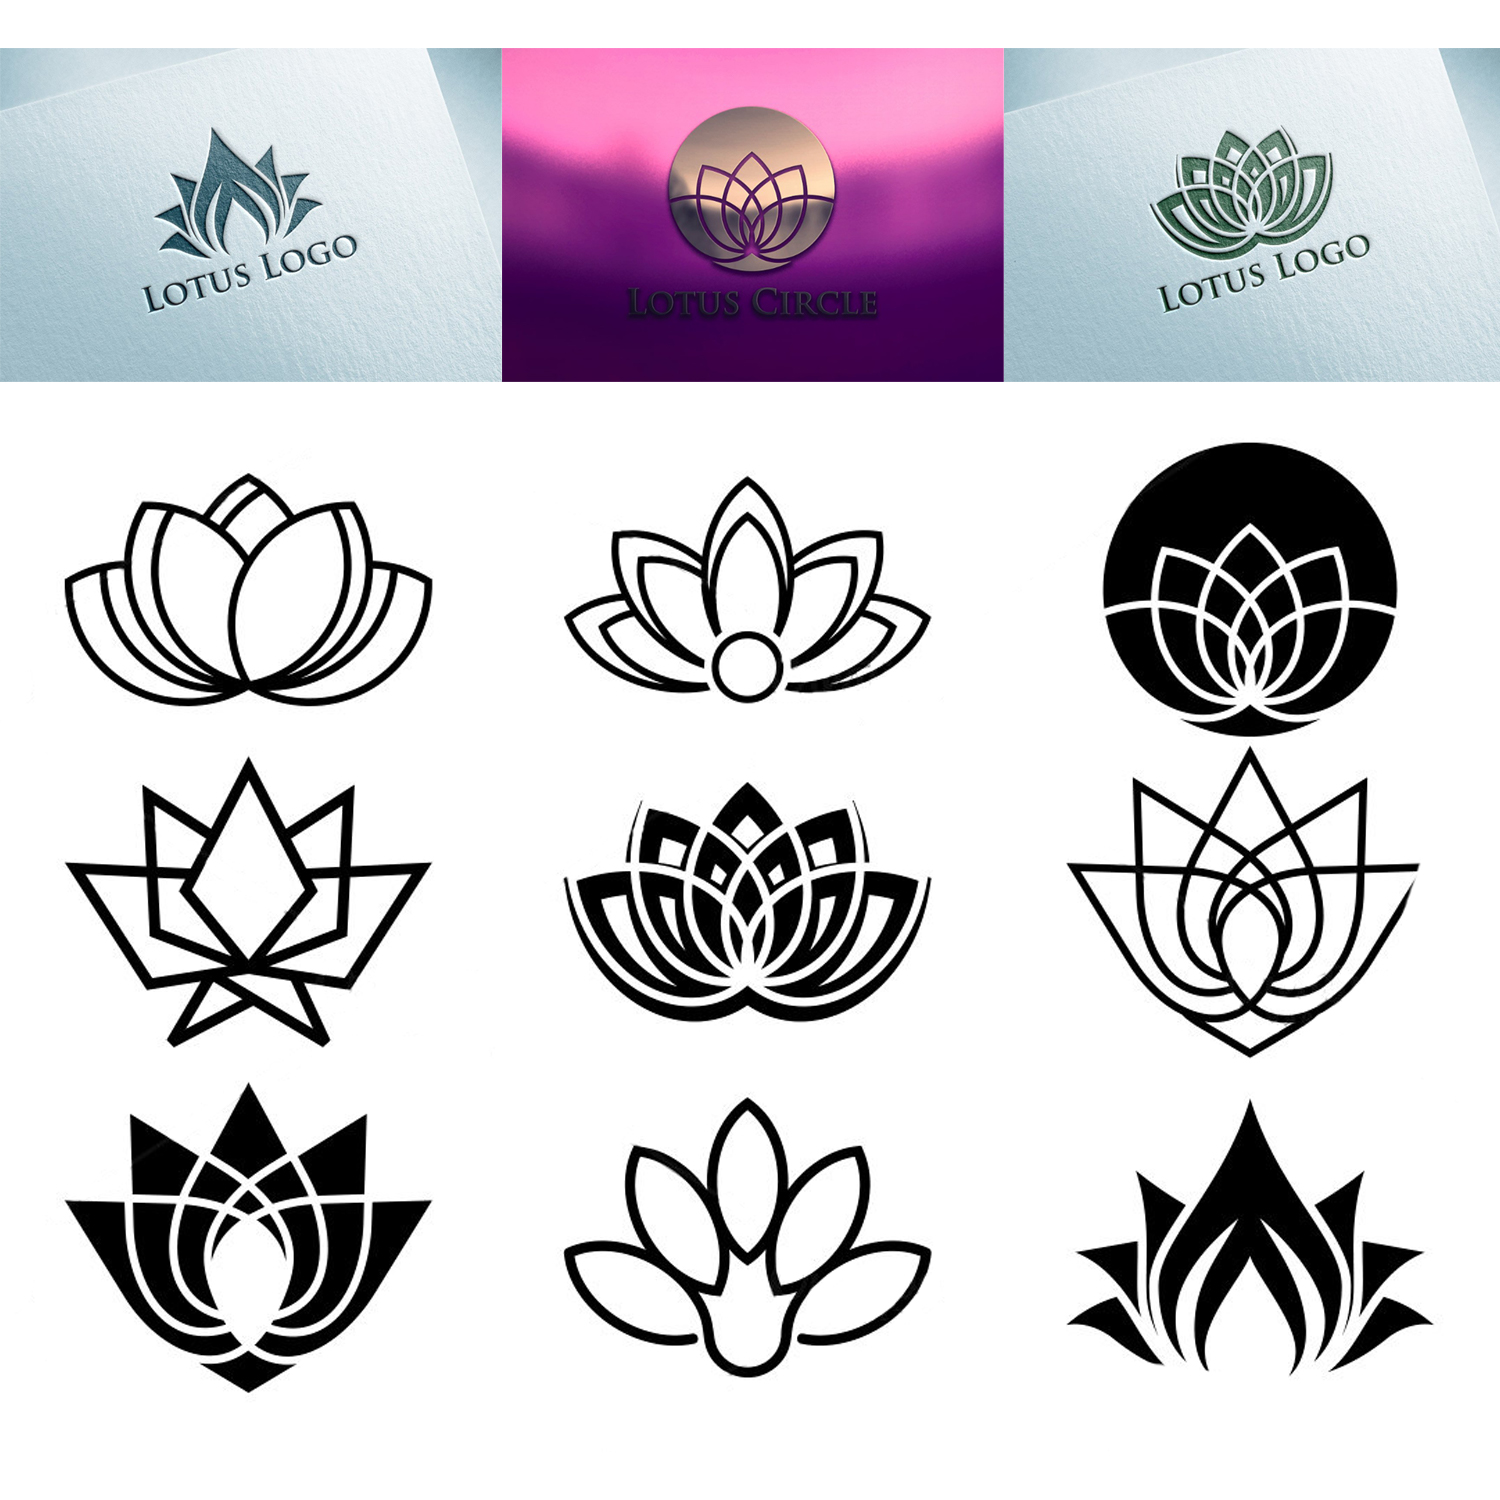 Three logos with a lotus flower in different color variations and nine black and white ones.